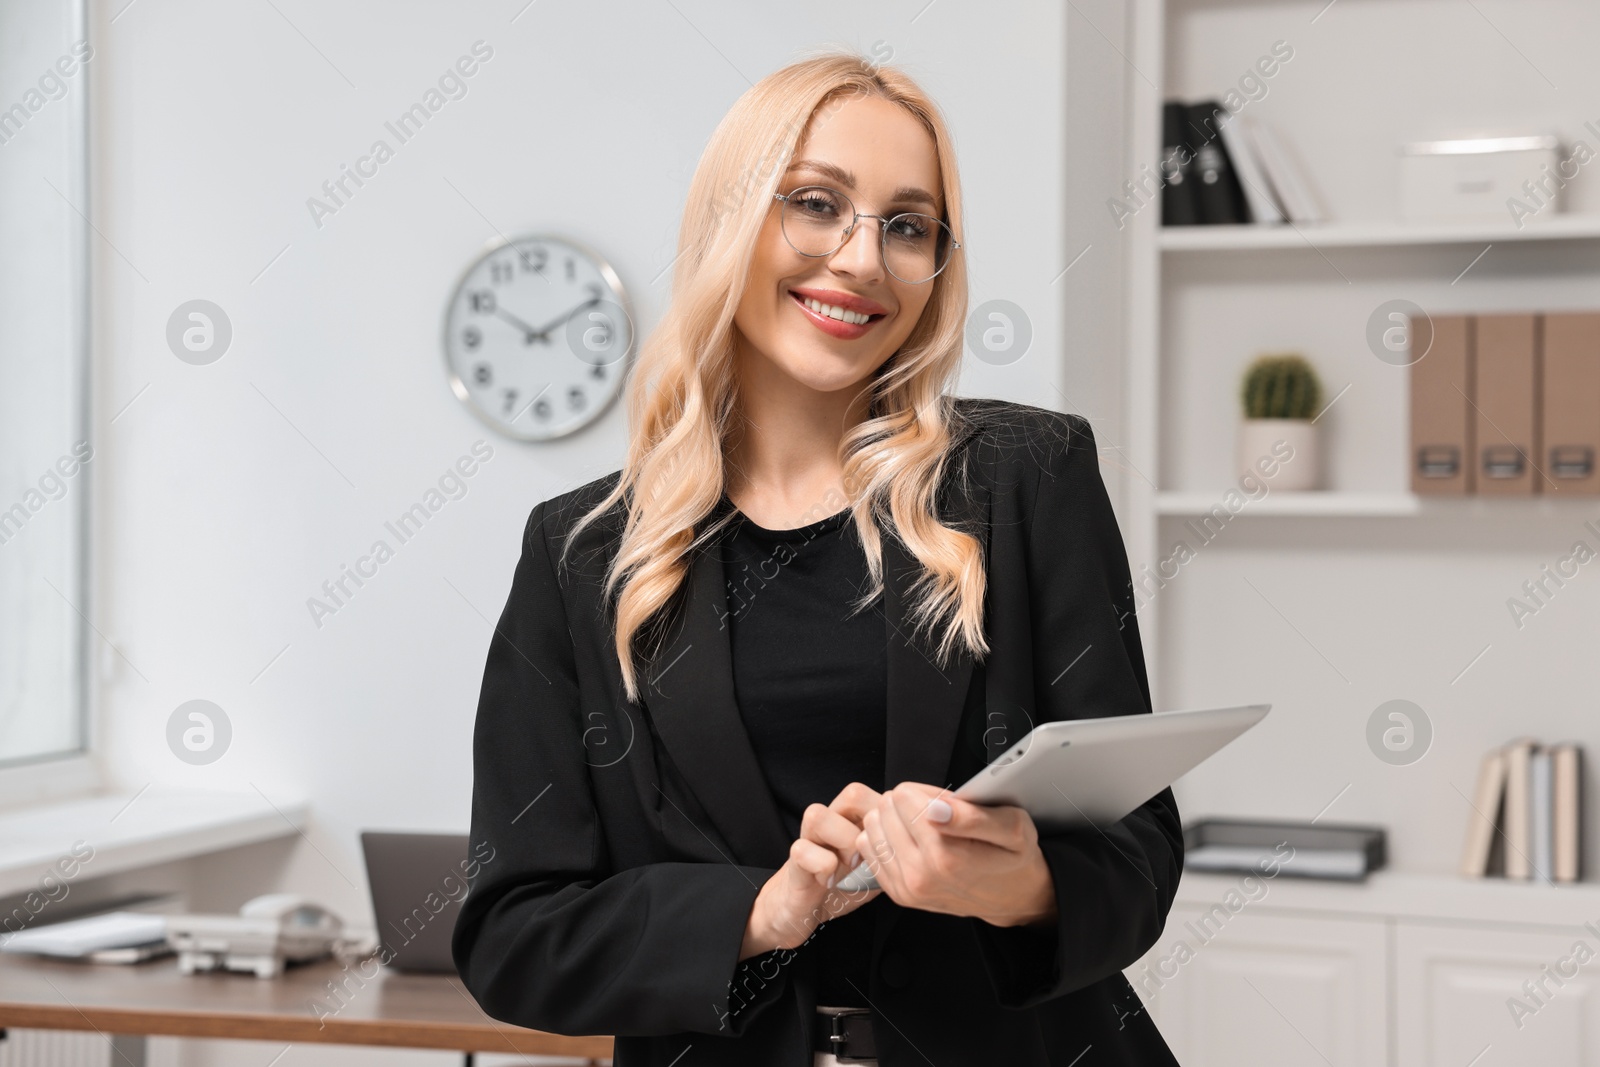 Photo of Portrait of happy secretary with tablet in office